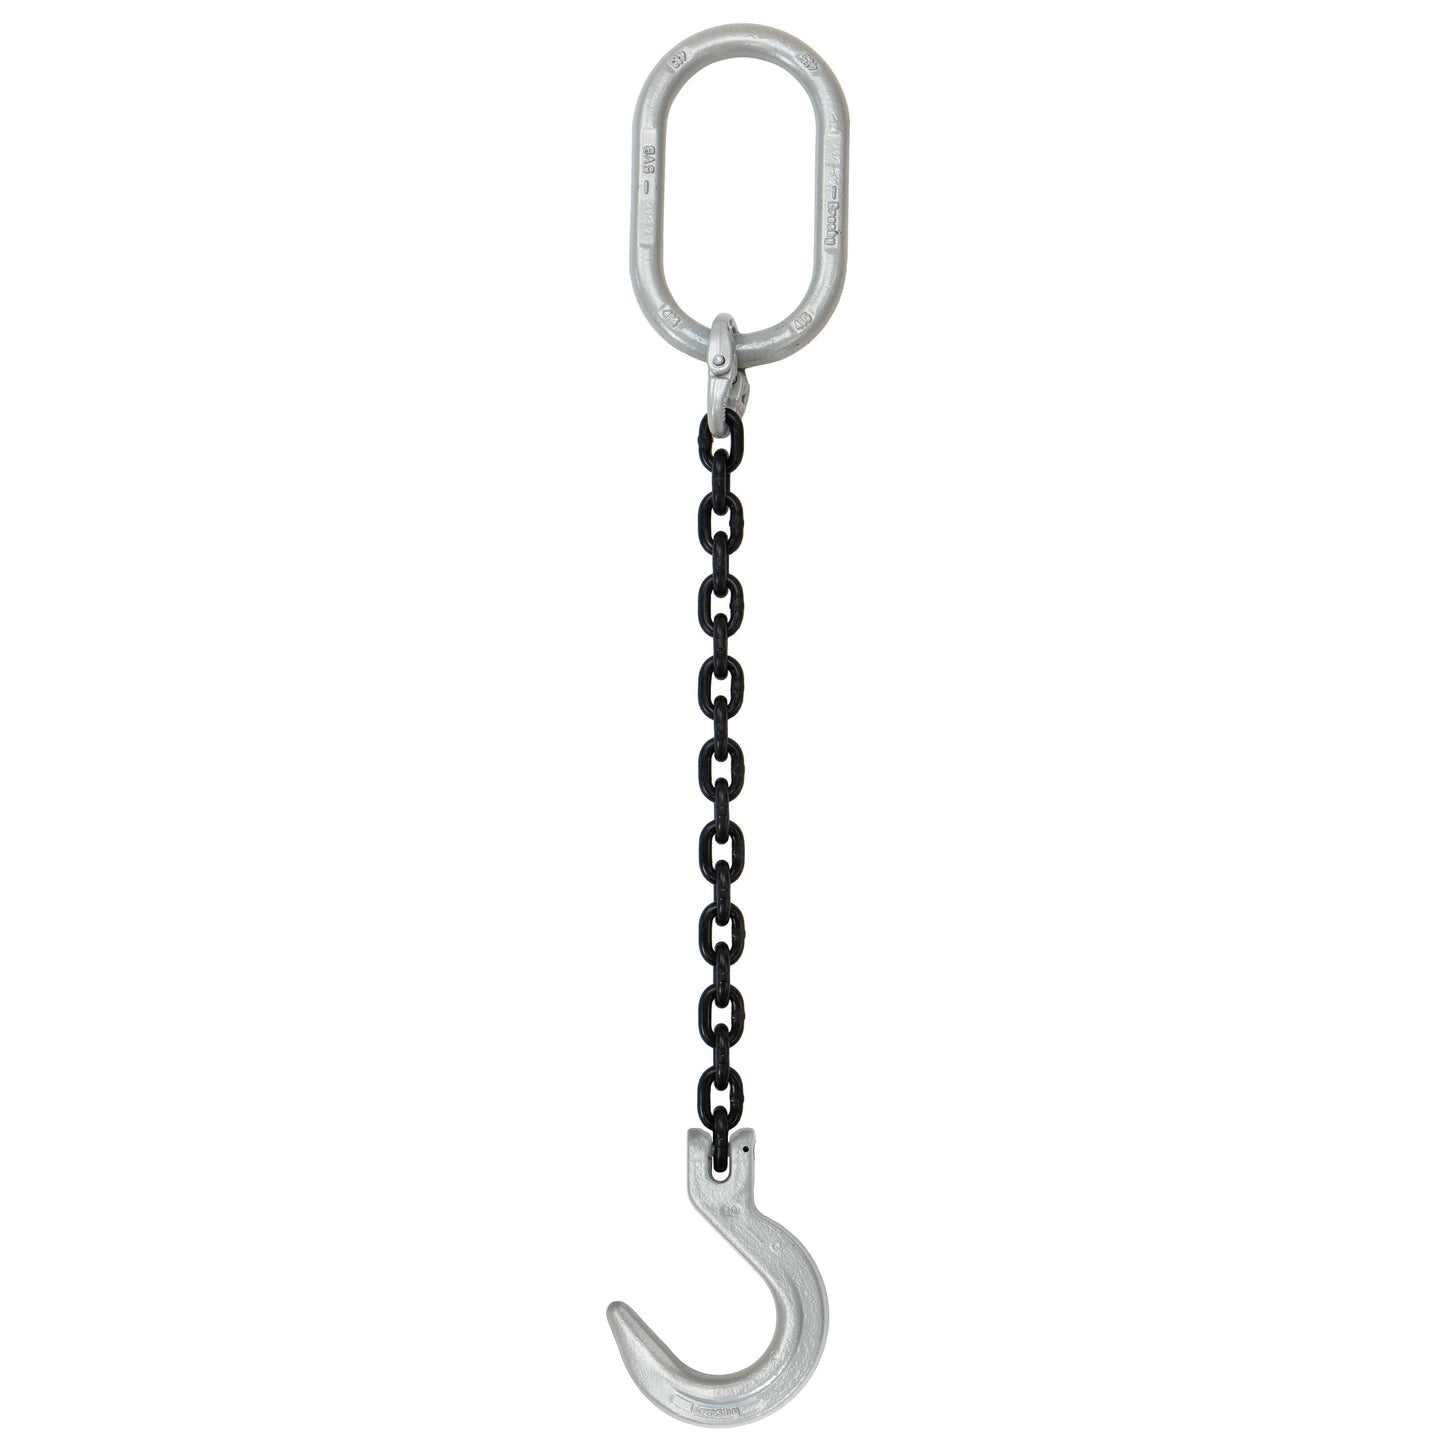 38 inch x 5 foot Domestic Single Leg Chain Sling w Crosby Foundry Hook Grade 100 image 1 of 2